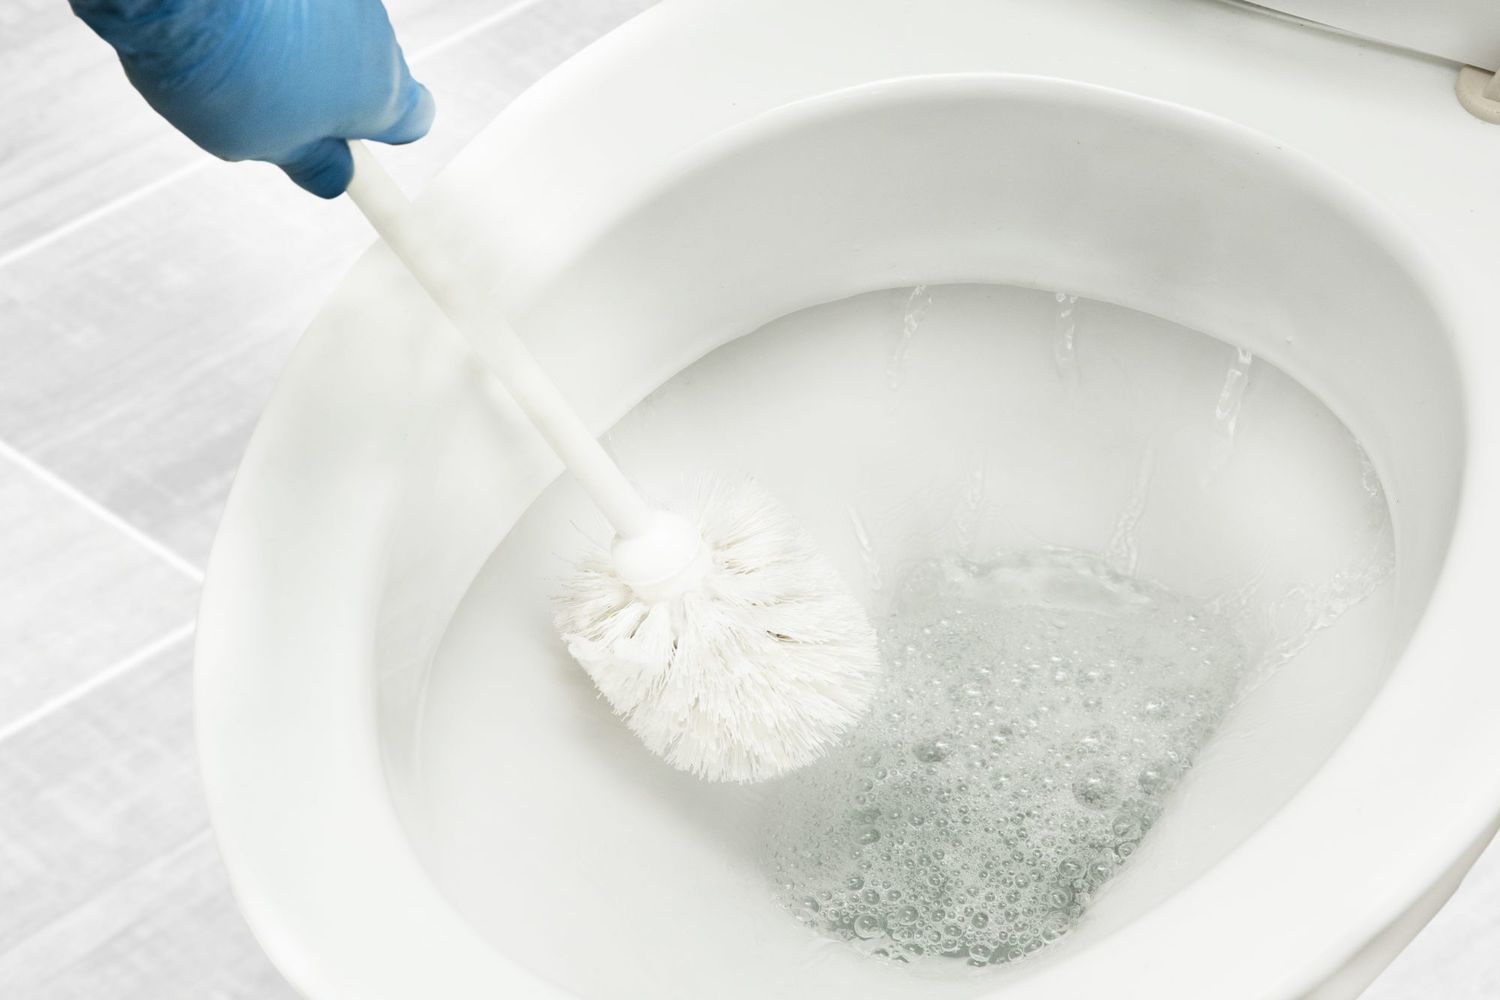 scrubbing toilet with brush